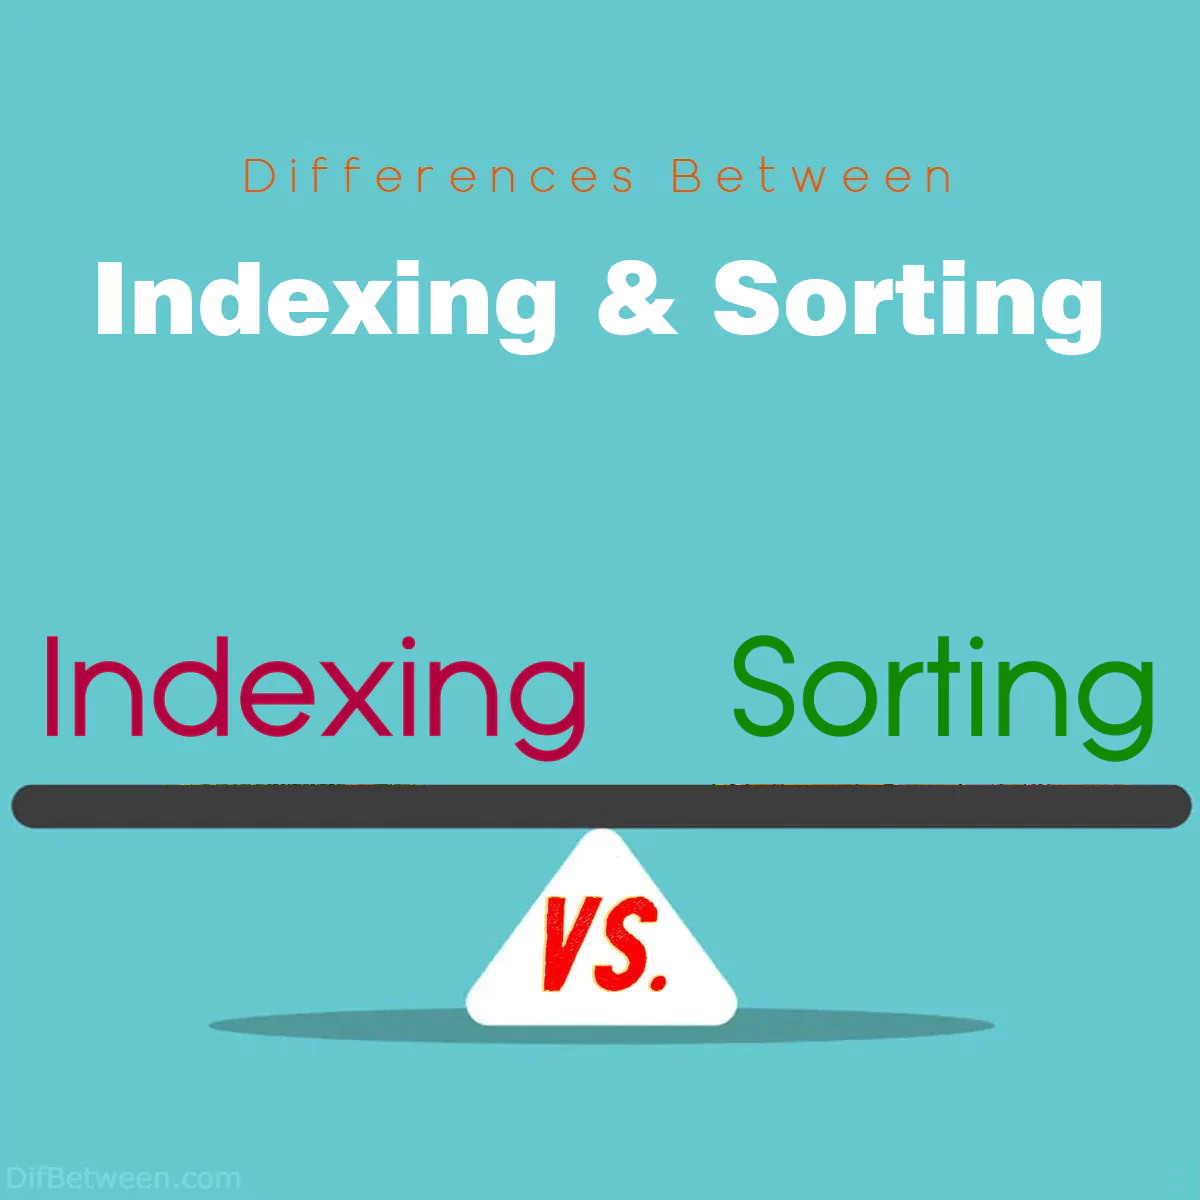 Differences Between Indexing and Sorting